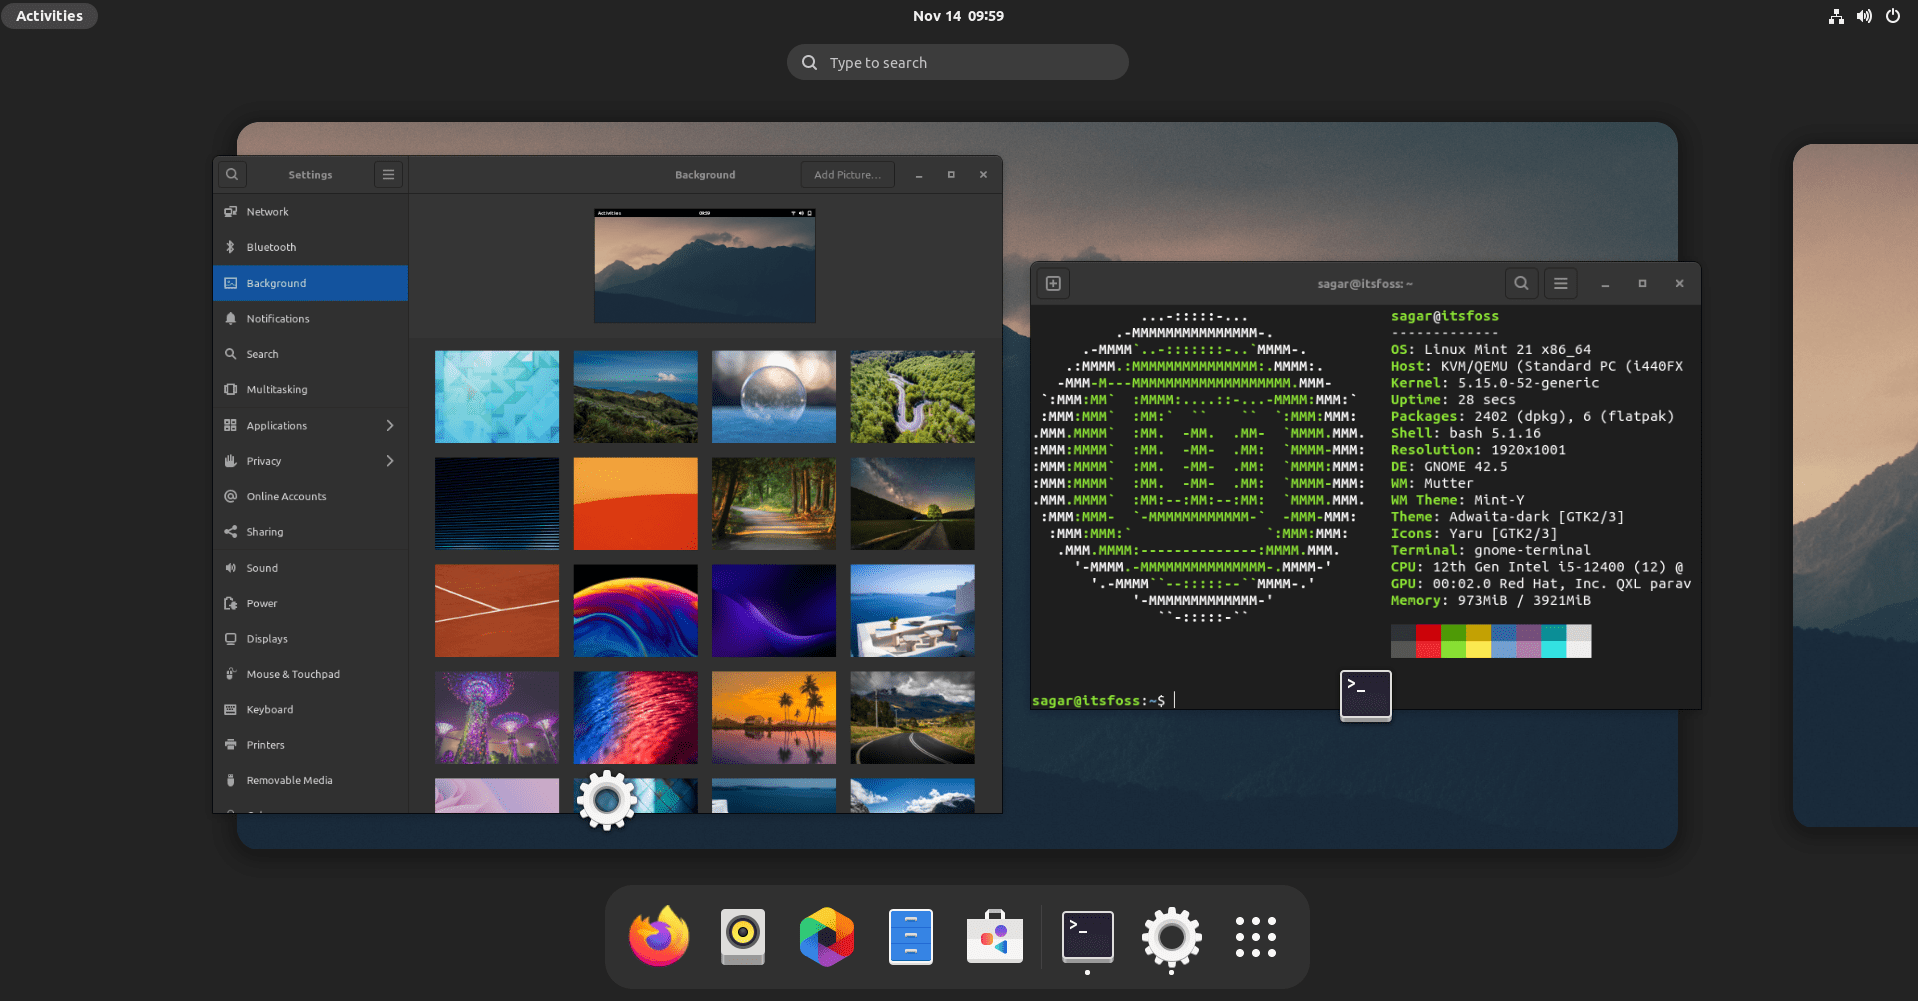 How to Install GNOME Desktop Environment on Linux Mint